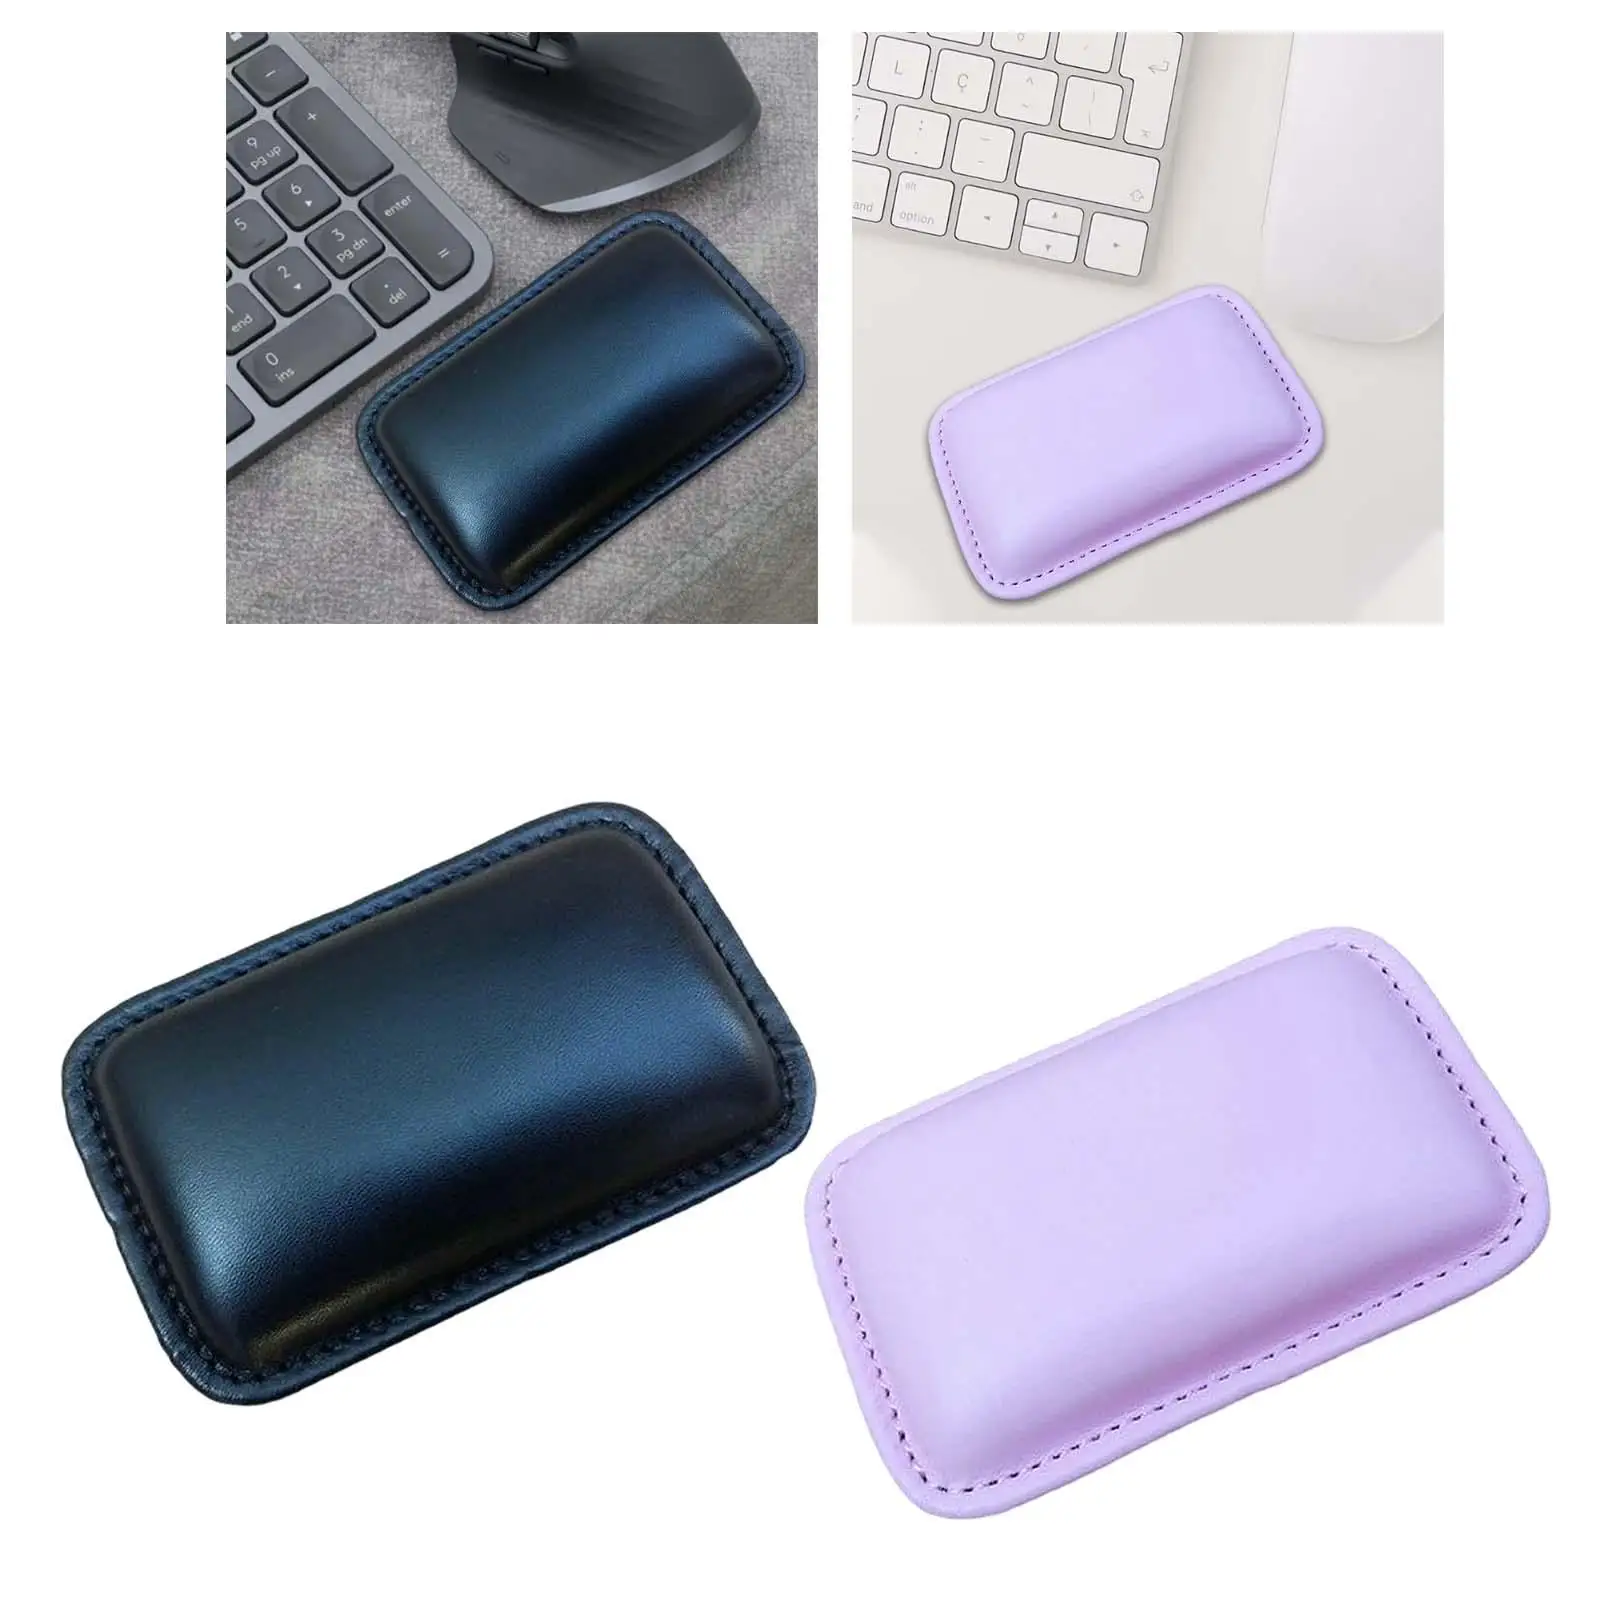 PU Leather Mouse Wrist Rest Waterproof Non Slip Base Wrist Pain Ease Reduce Wrist Fatigue Pain Hand Rest Cushion for Computer